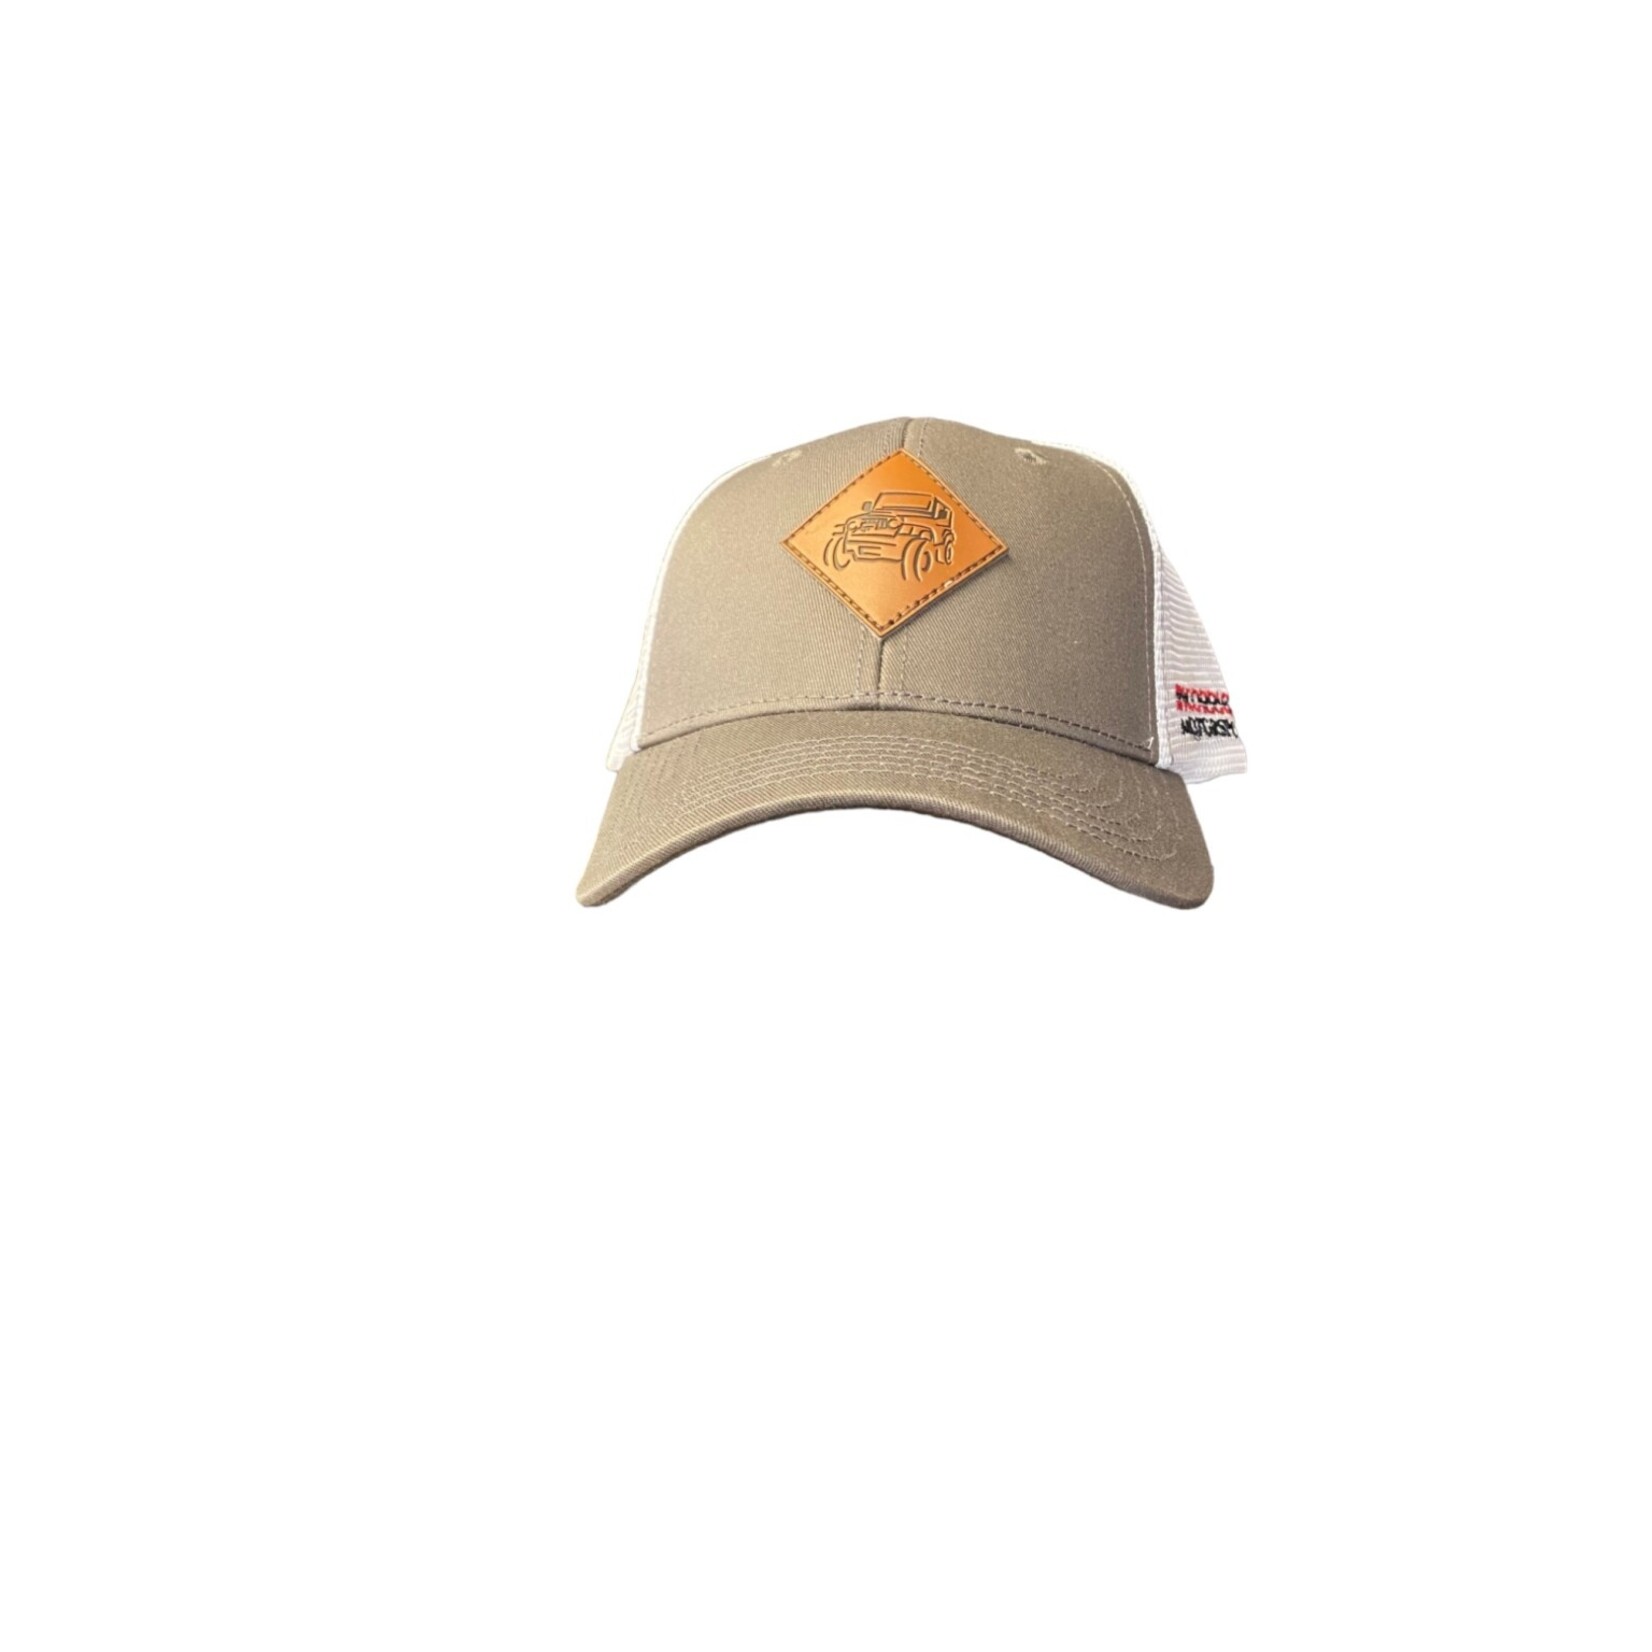 INCORRIGIBLE MOTORSPORTS INCORRIGIBLE OFF-ROAD LEATHER PATCH 6 PANEL STRUCTURED MESH SNAP BACK HAT